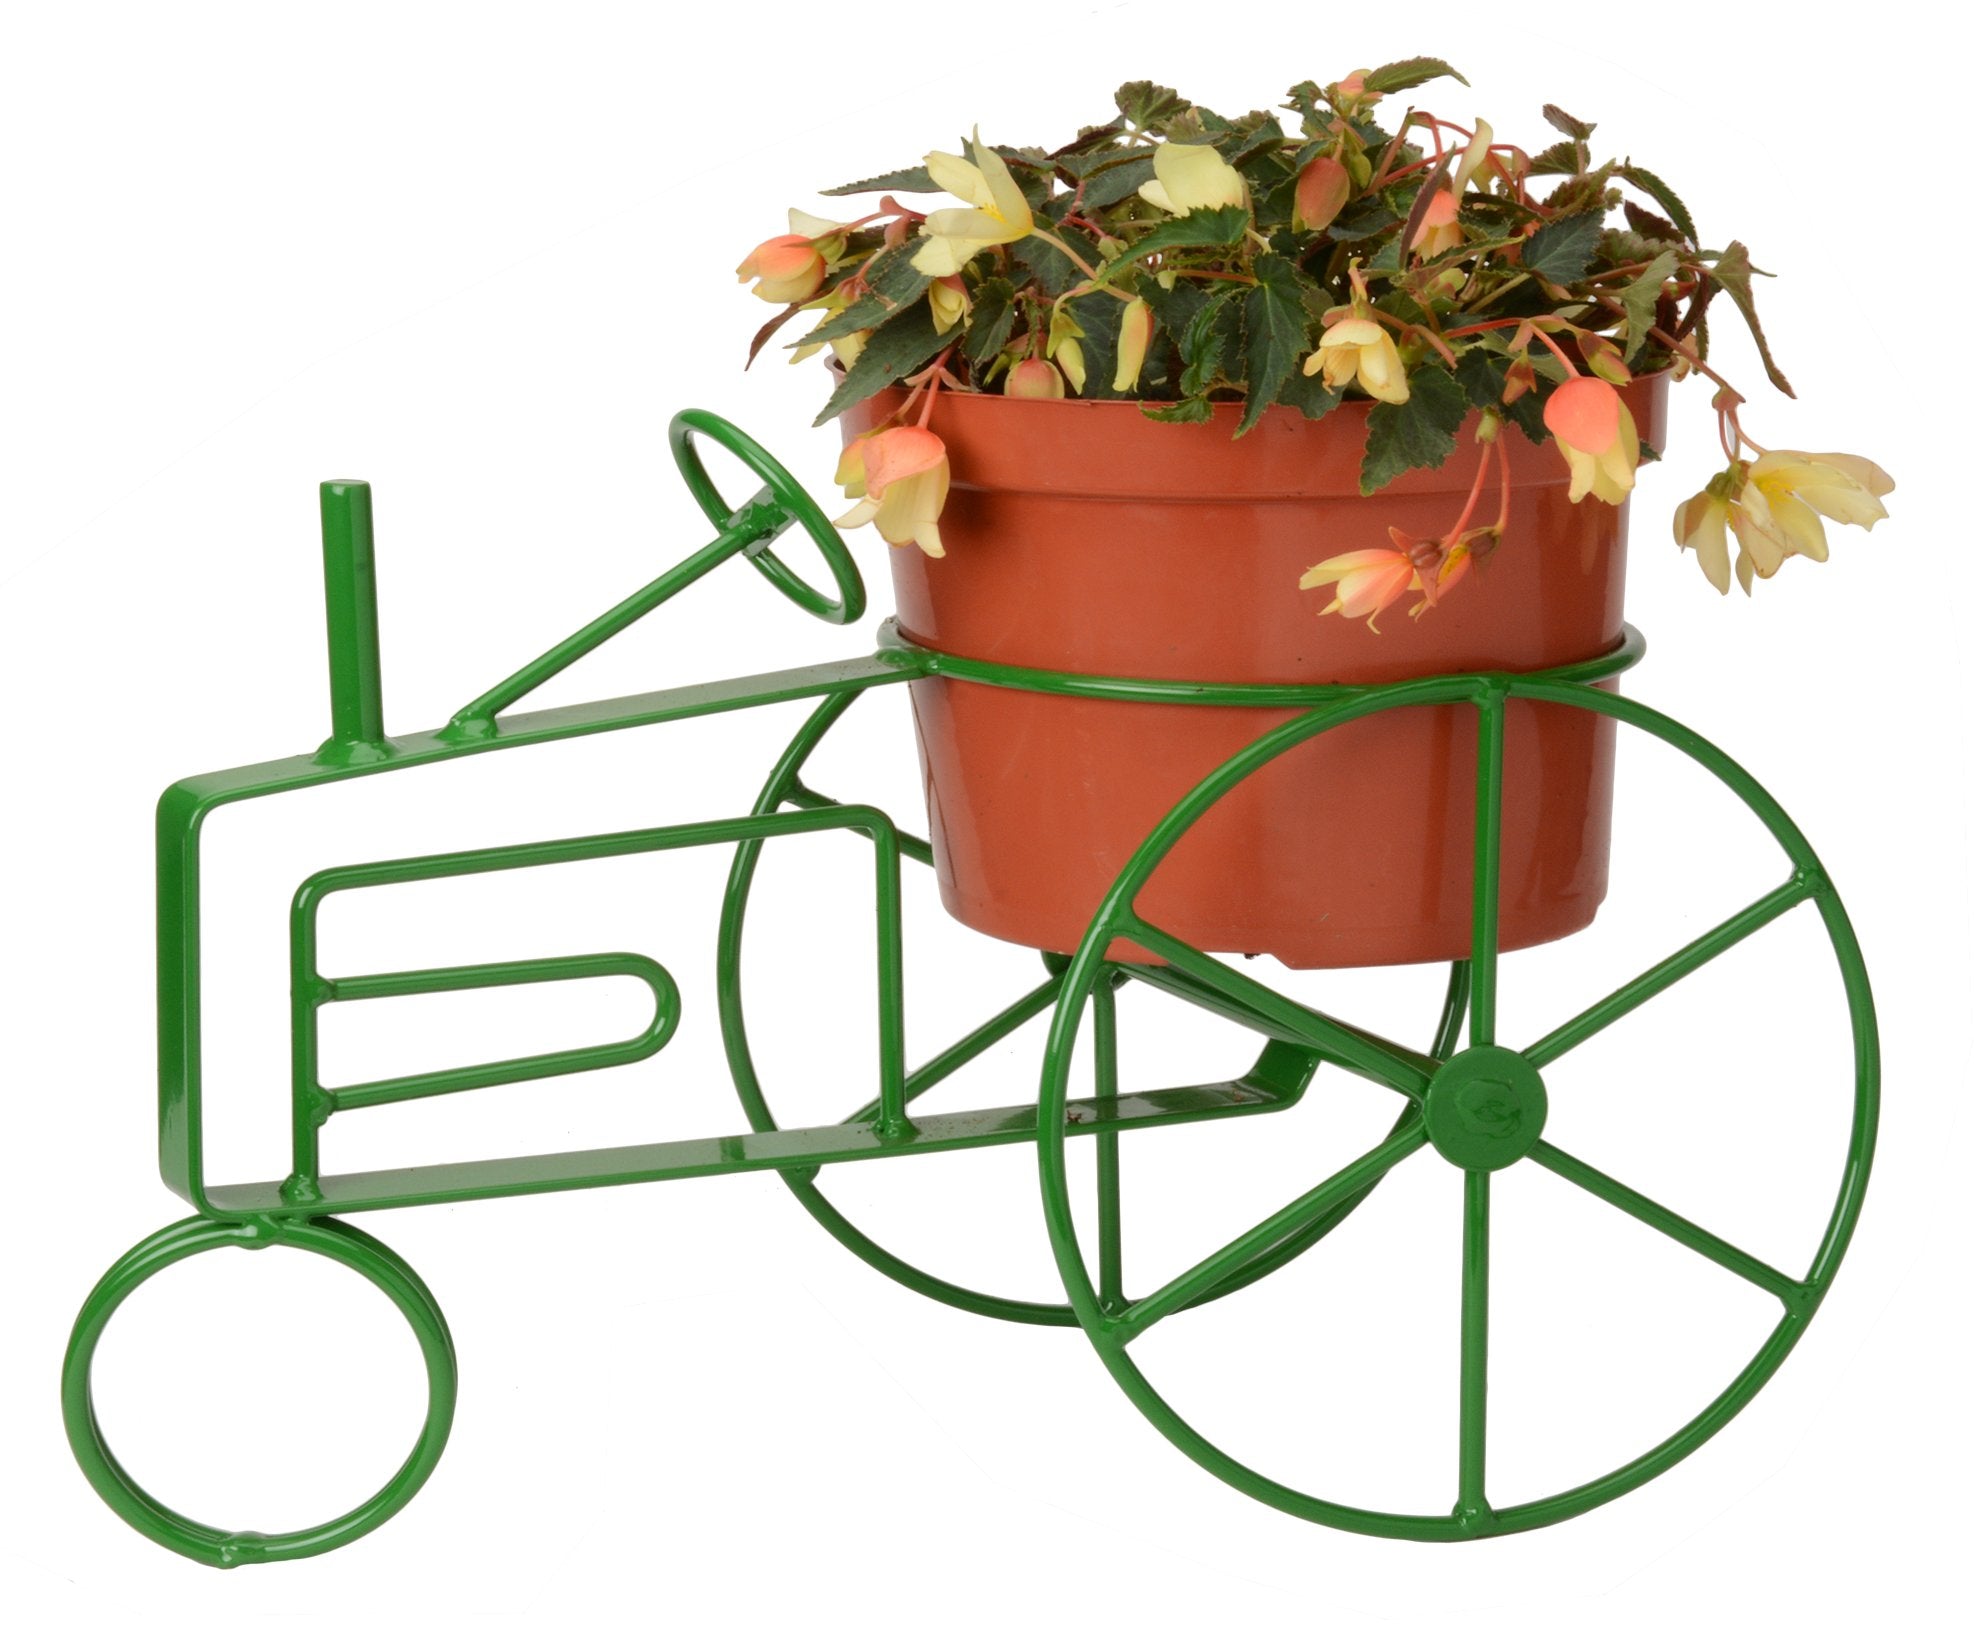 FARM TRACTOR PLANT STAND - Wrought Iron Flower Pot Holder in 5 Finishes